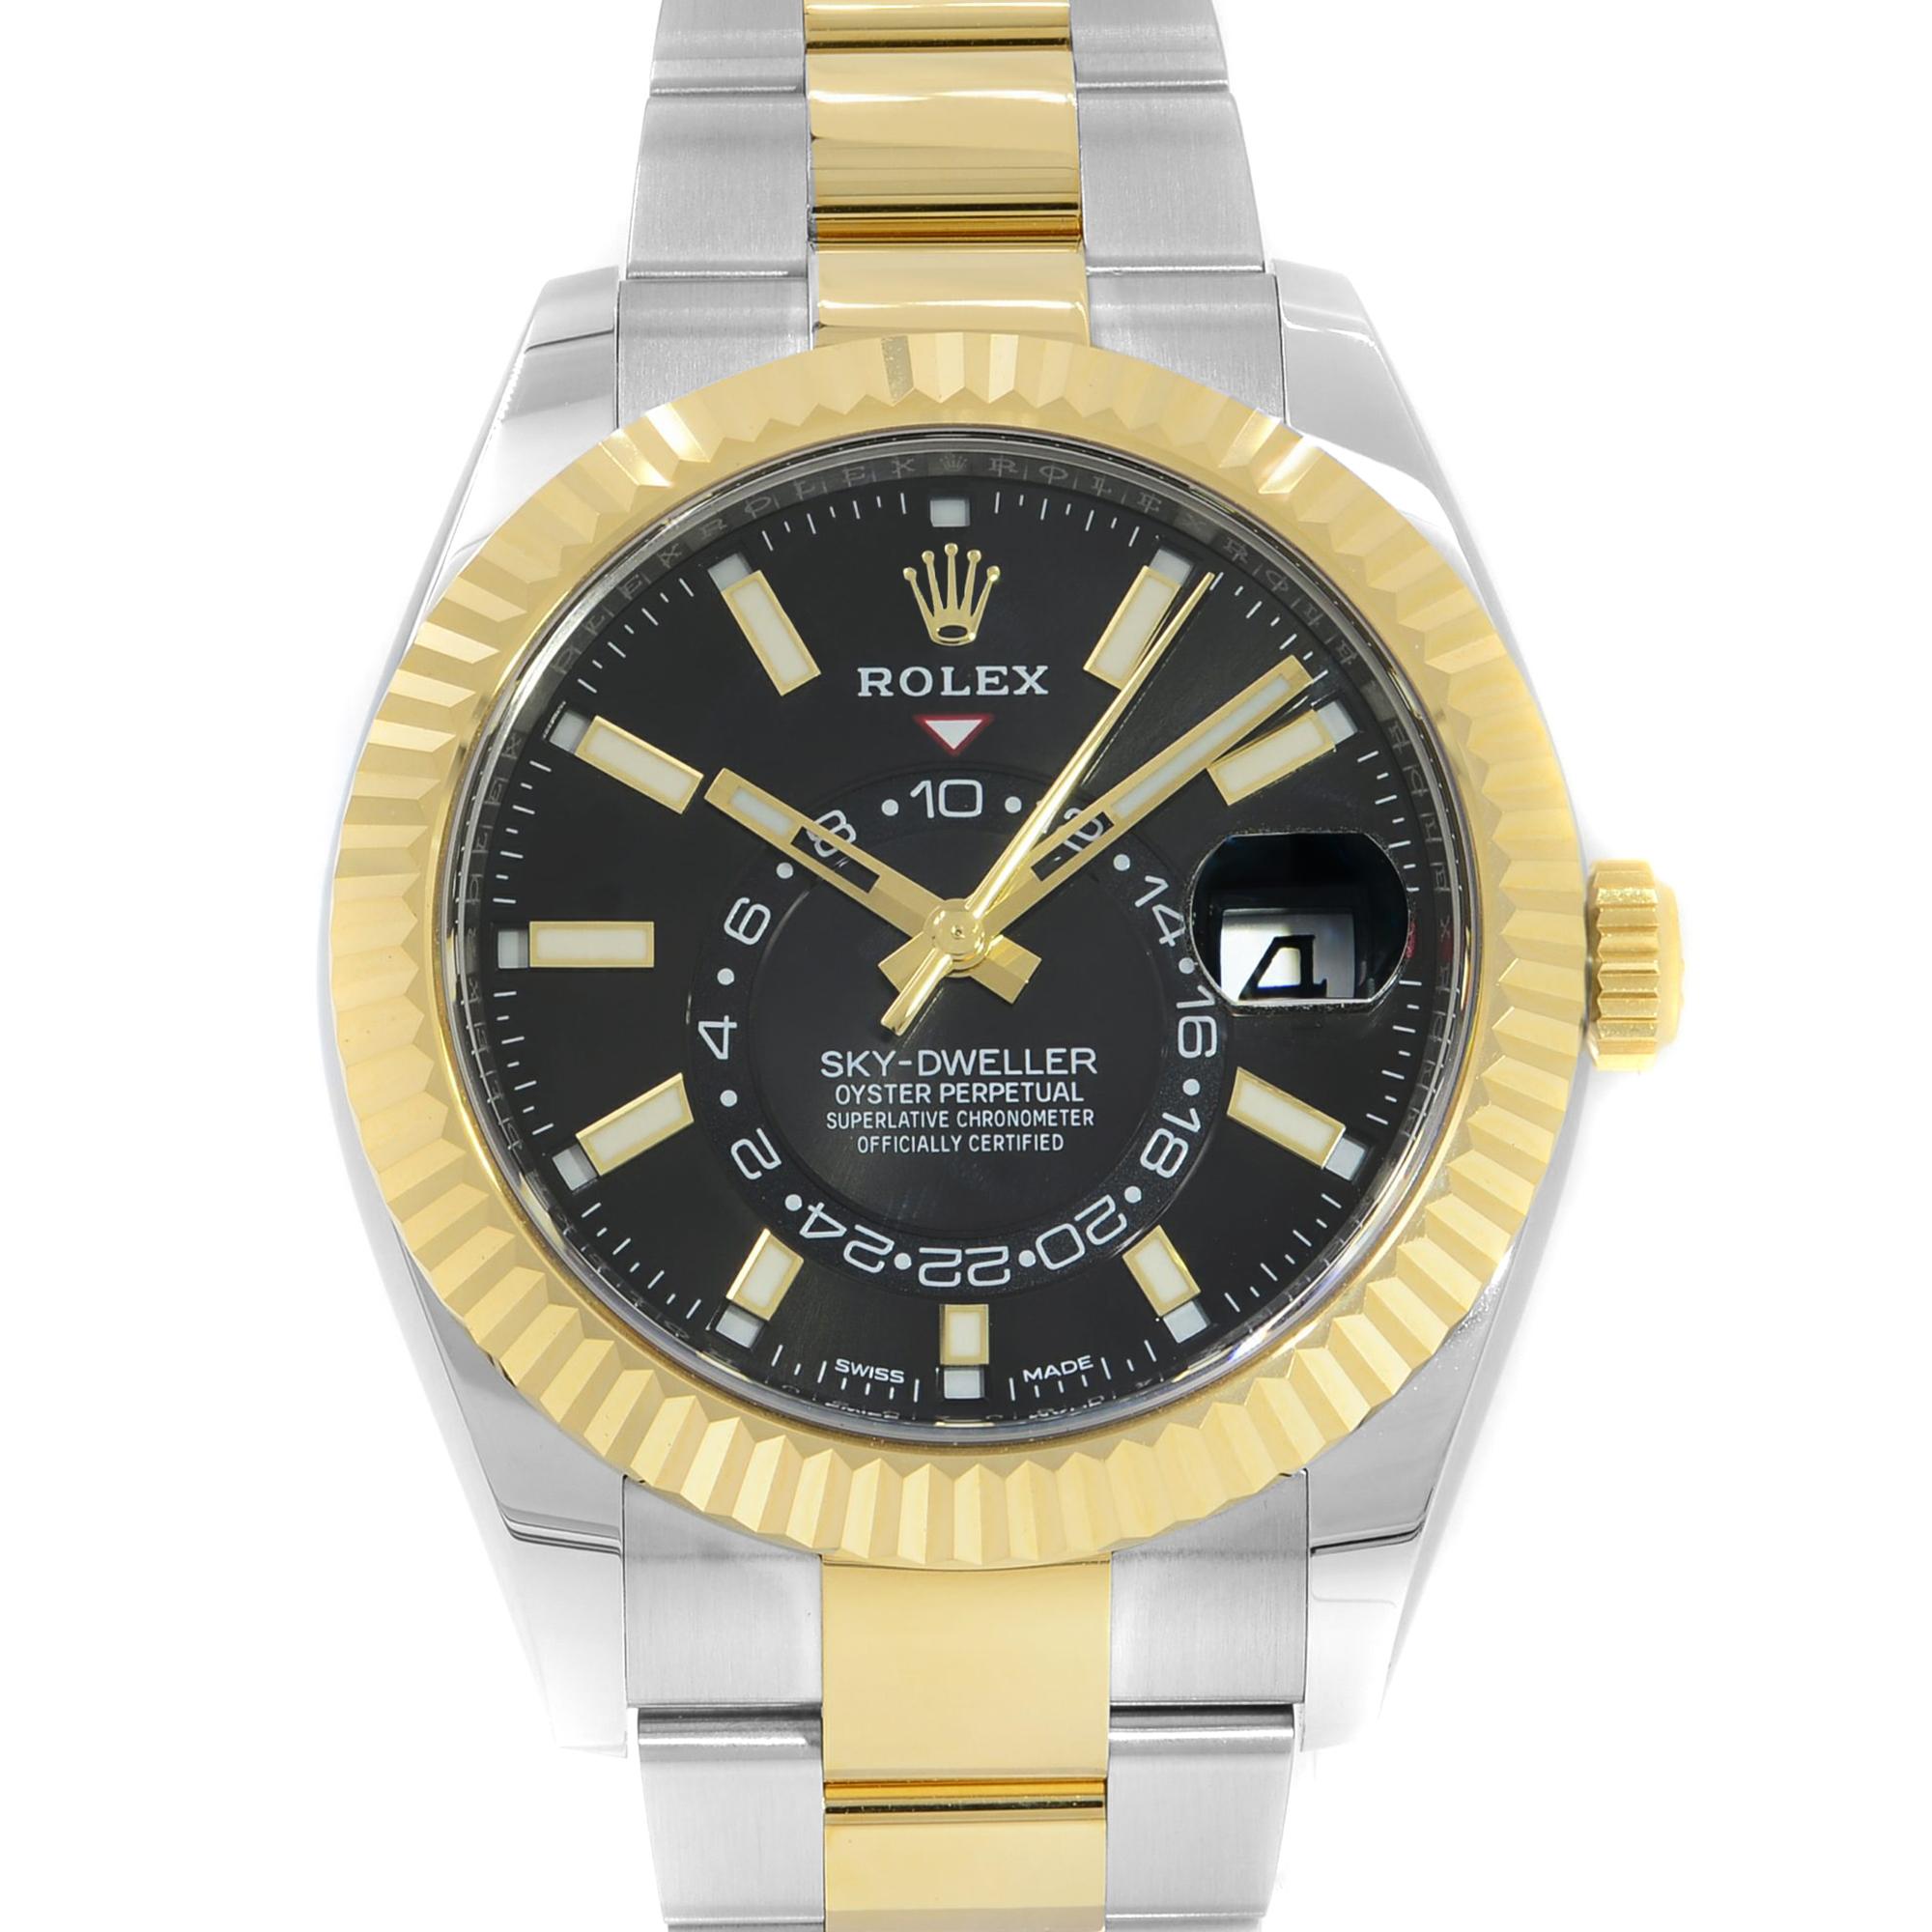 New. Original Box and Papers are Included. Covered by 5-year Chronostore Warranty.

General Information
Brand: Rolex
Model Number: 326933
Model: Sky-Dweller 326933
Type: Wristwatch
Department: Men
Country/Region of Manufacture: Switzerland
Style: